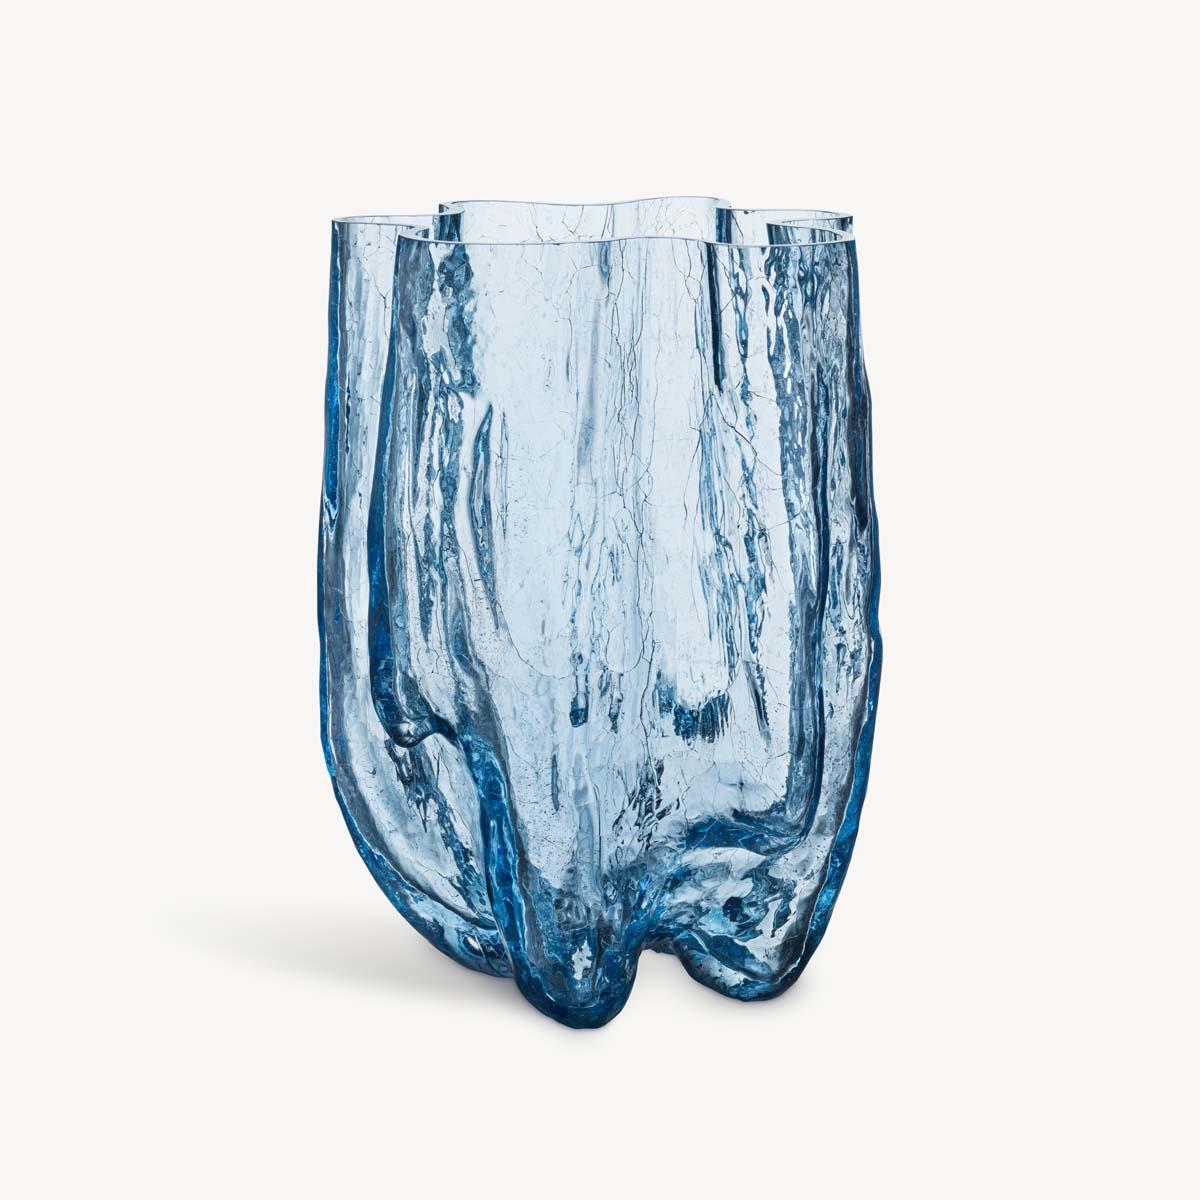 Crackle and thunder – a magical wonder! At Kosta Boda, we marvel at beautifully preserved cracks in glass. The vase in circular glass from the Crackle collection has an expressive, sculptural exterior created using an old handicraft technique where